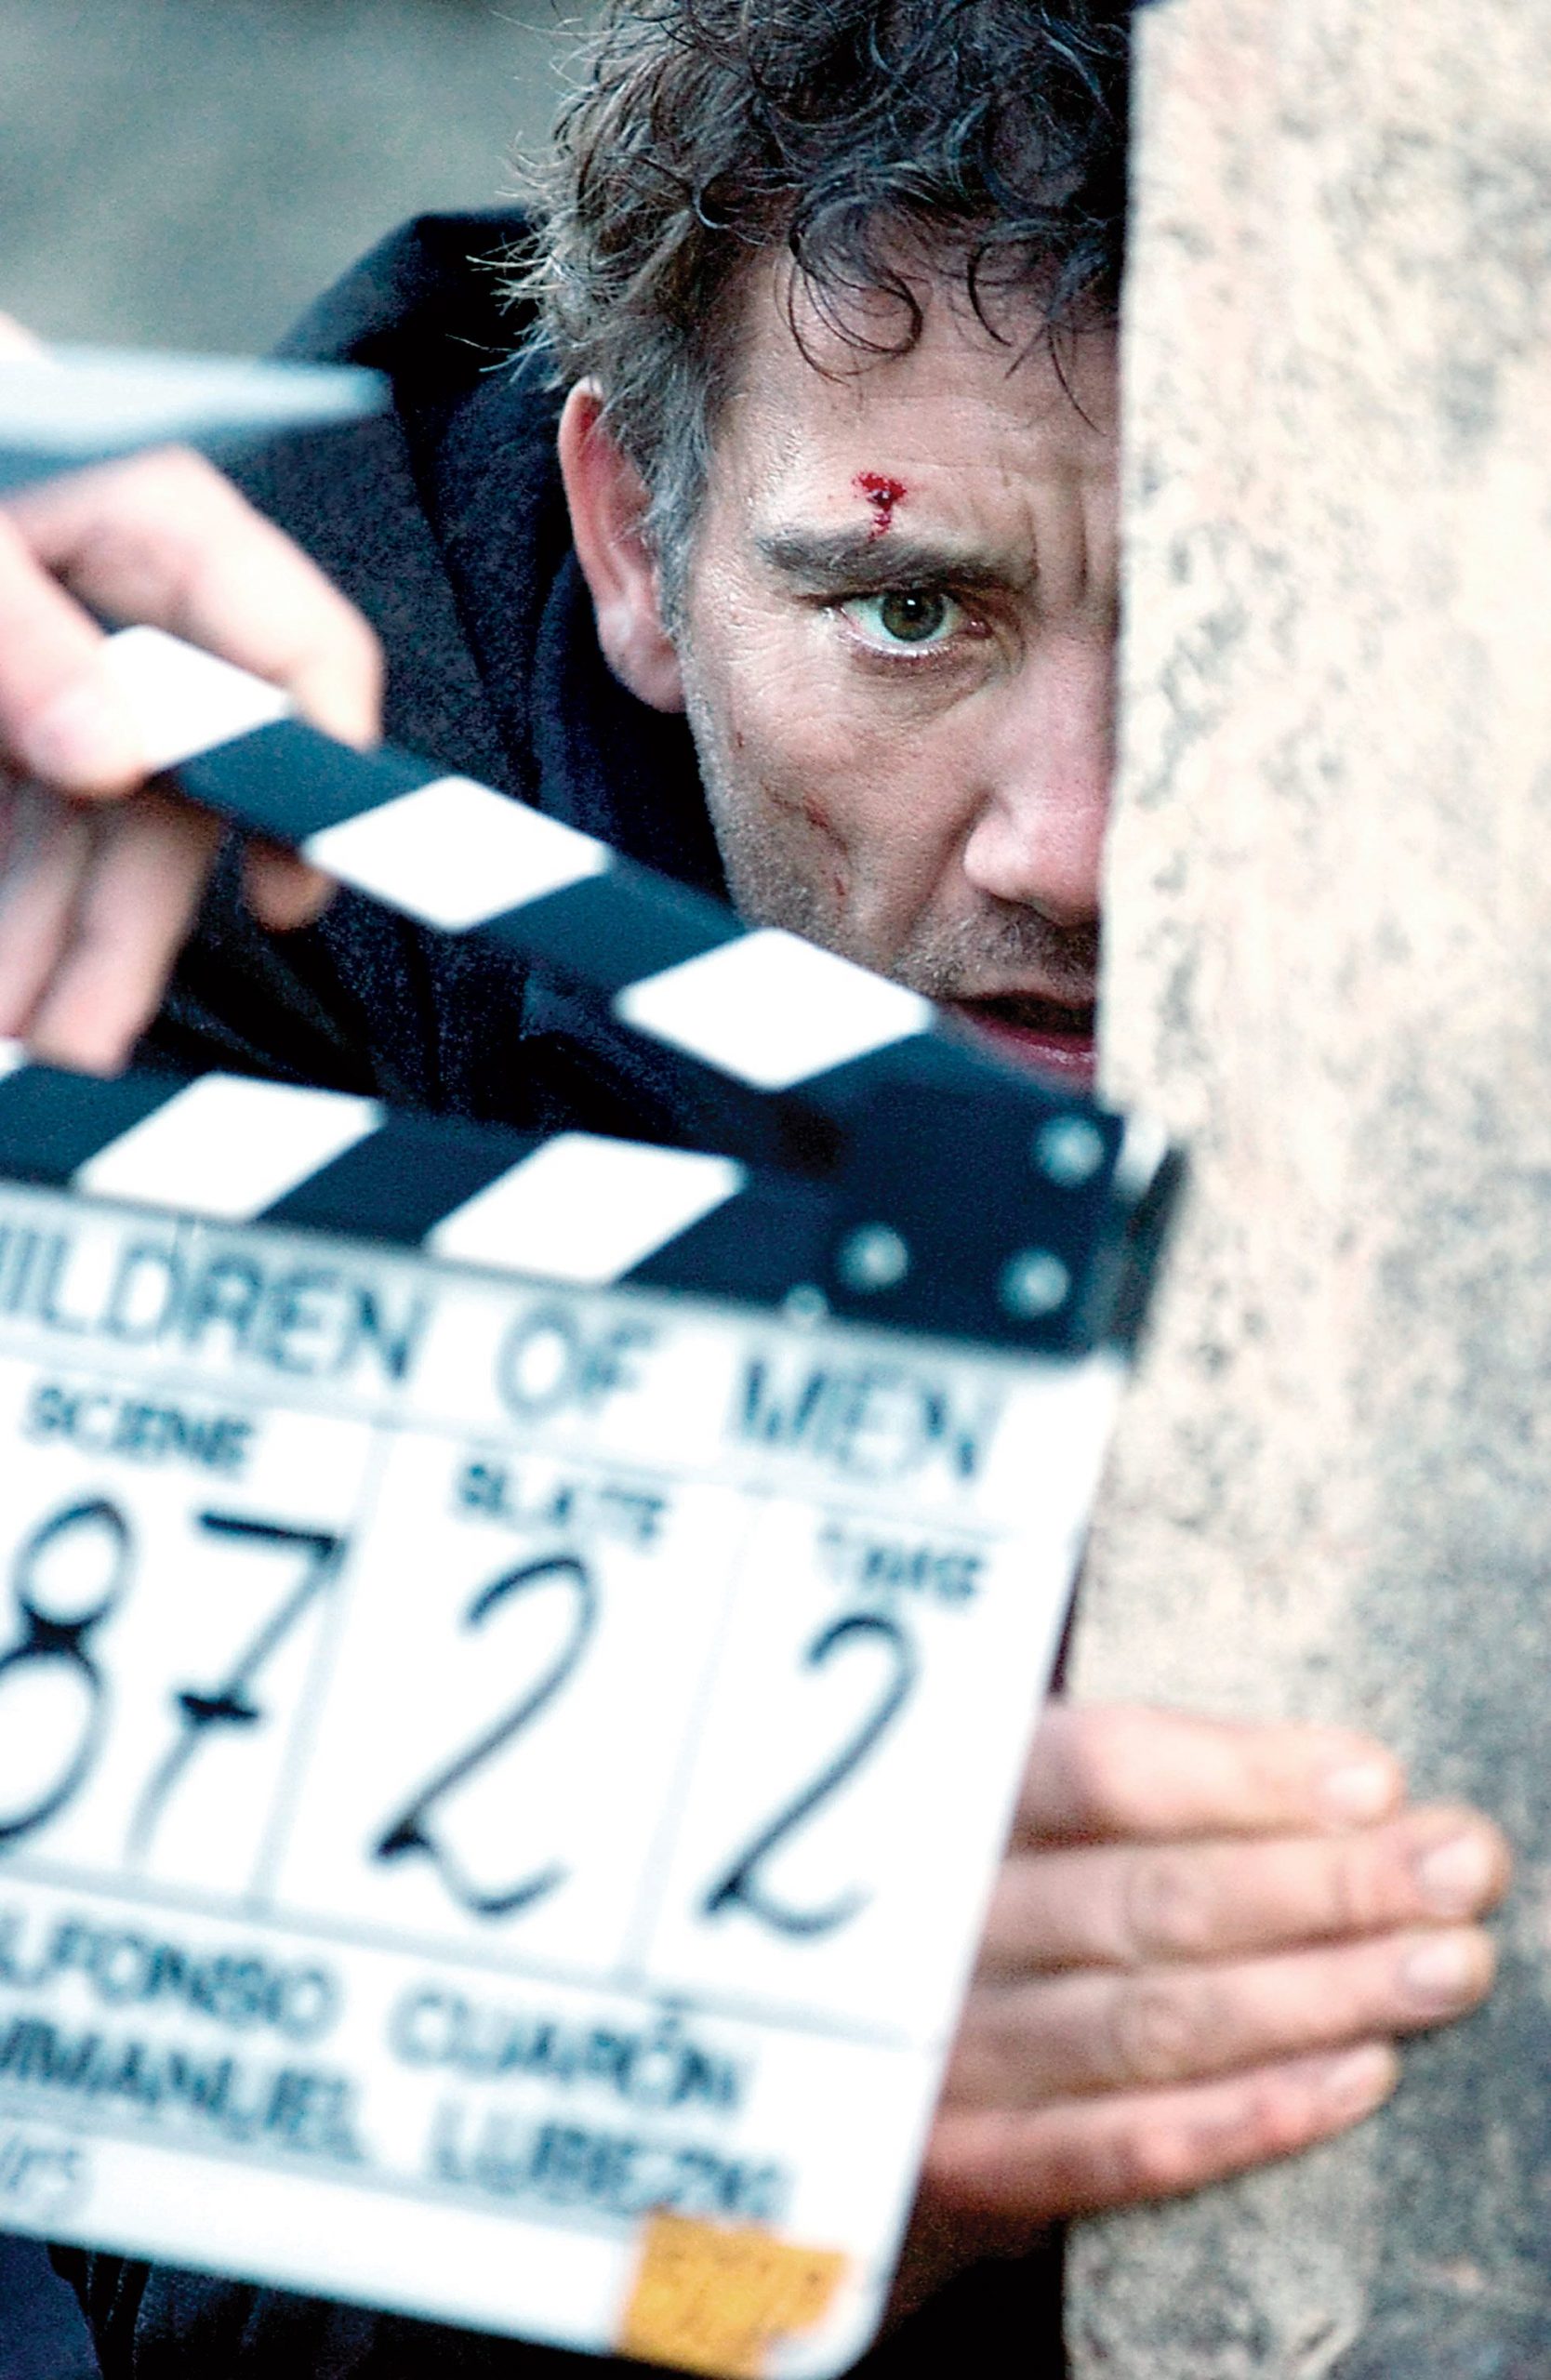 The Future is Now: Alfonso Cuarón’s ‘Children of Men’ Paints a Bleak Picture of a World Devoid of Humanity